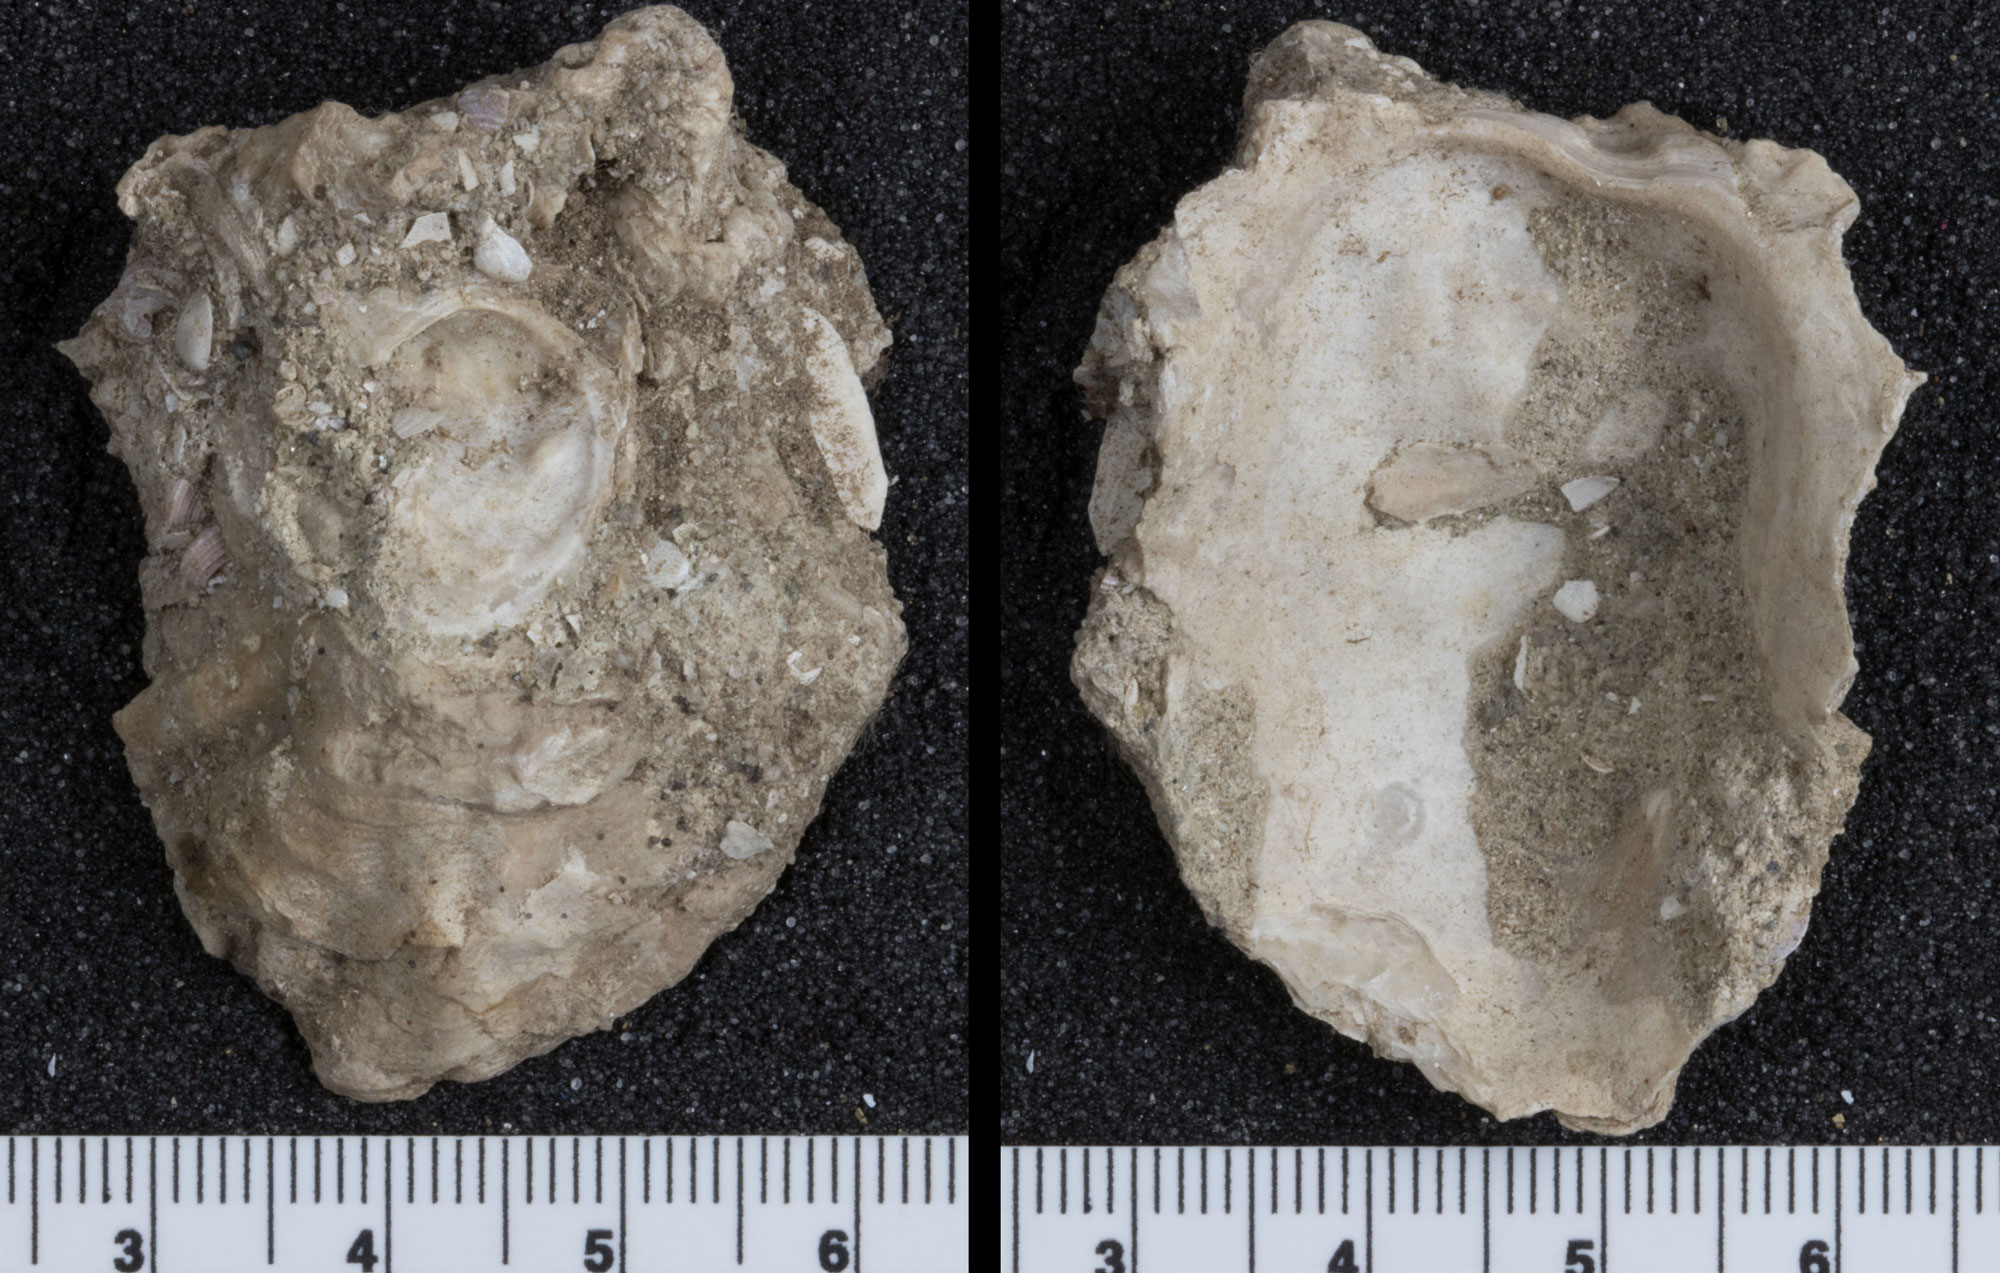 Photographs showing two views of an oyster shell, one of the outer surface and one of the inner surface. The valve is longer than it is wide and other outer surface is not smooth, but has irregular ridges. The outline of the shell is also slightly irregular. The valve is about 3.5 centimeters long, as indicated by a ruler at the bottom of each photo.